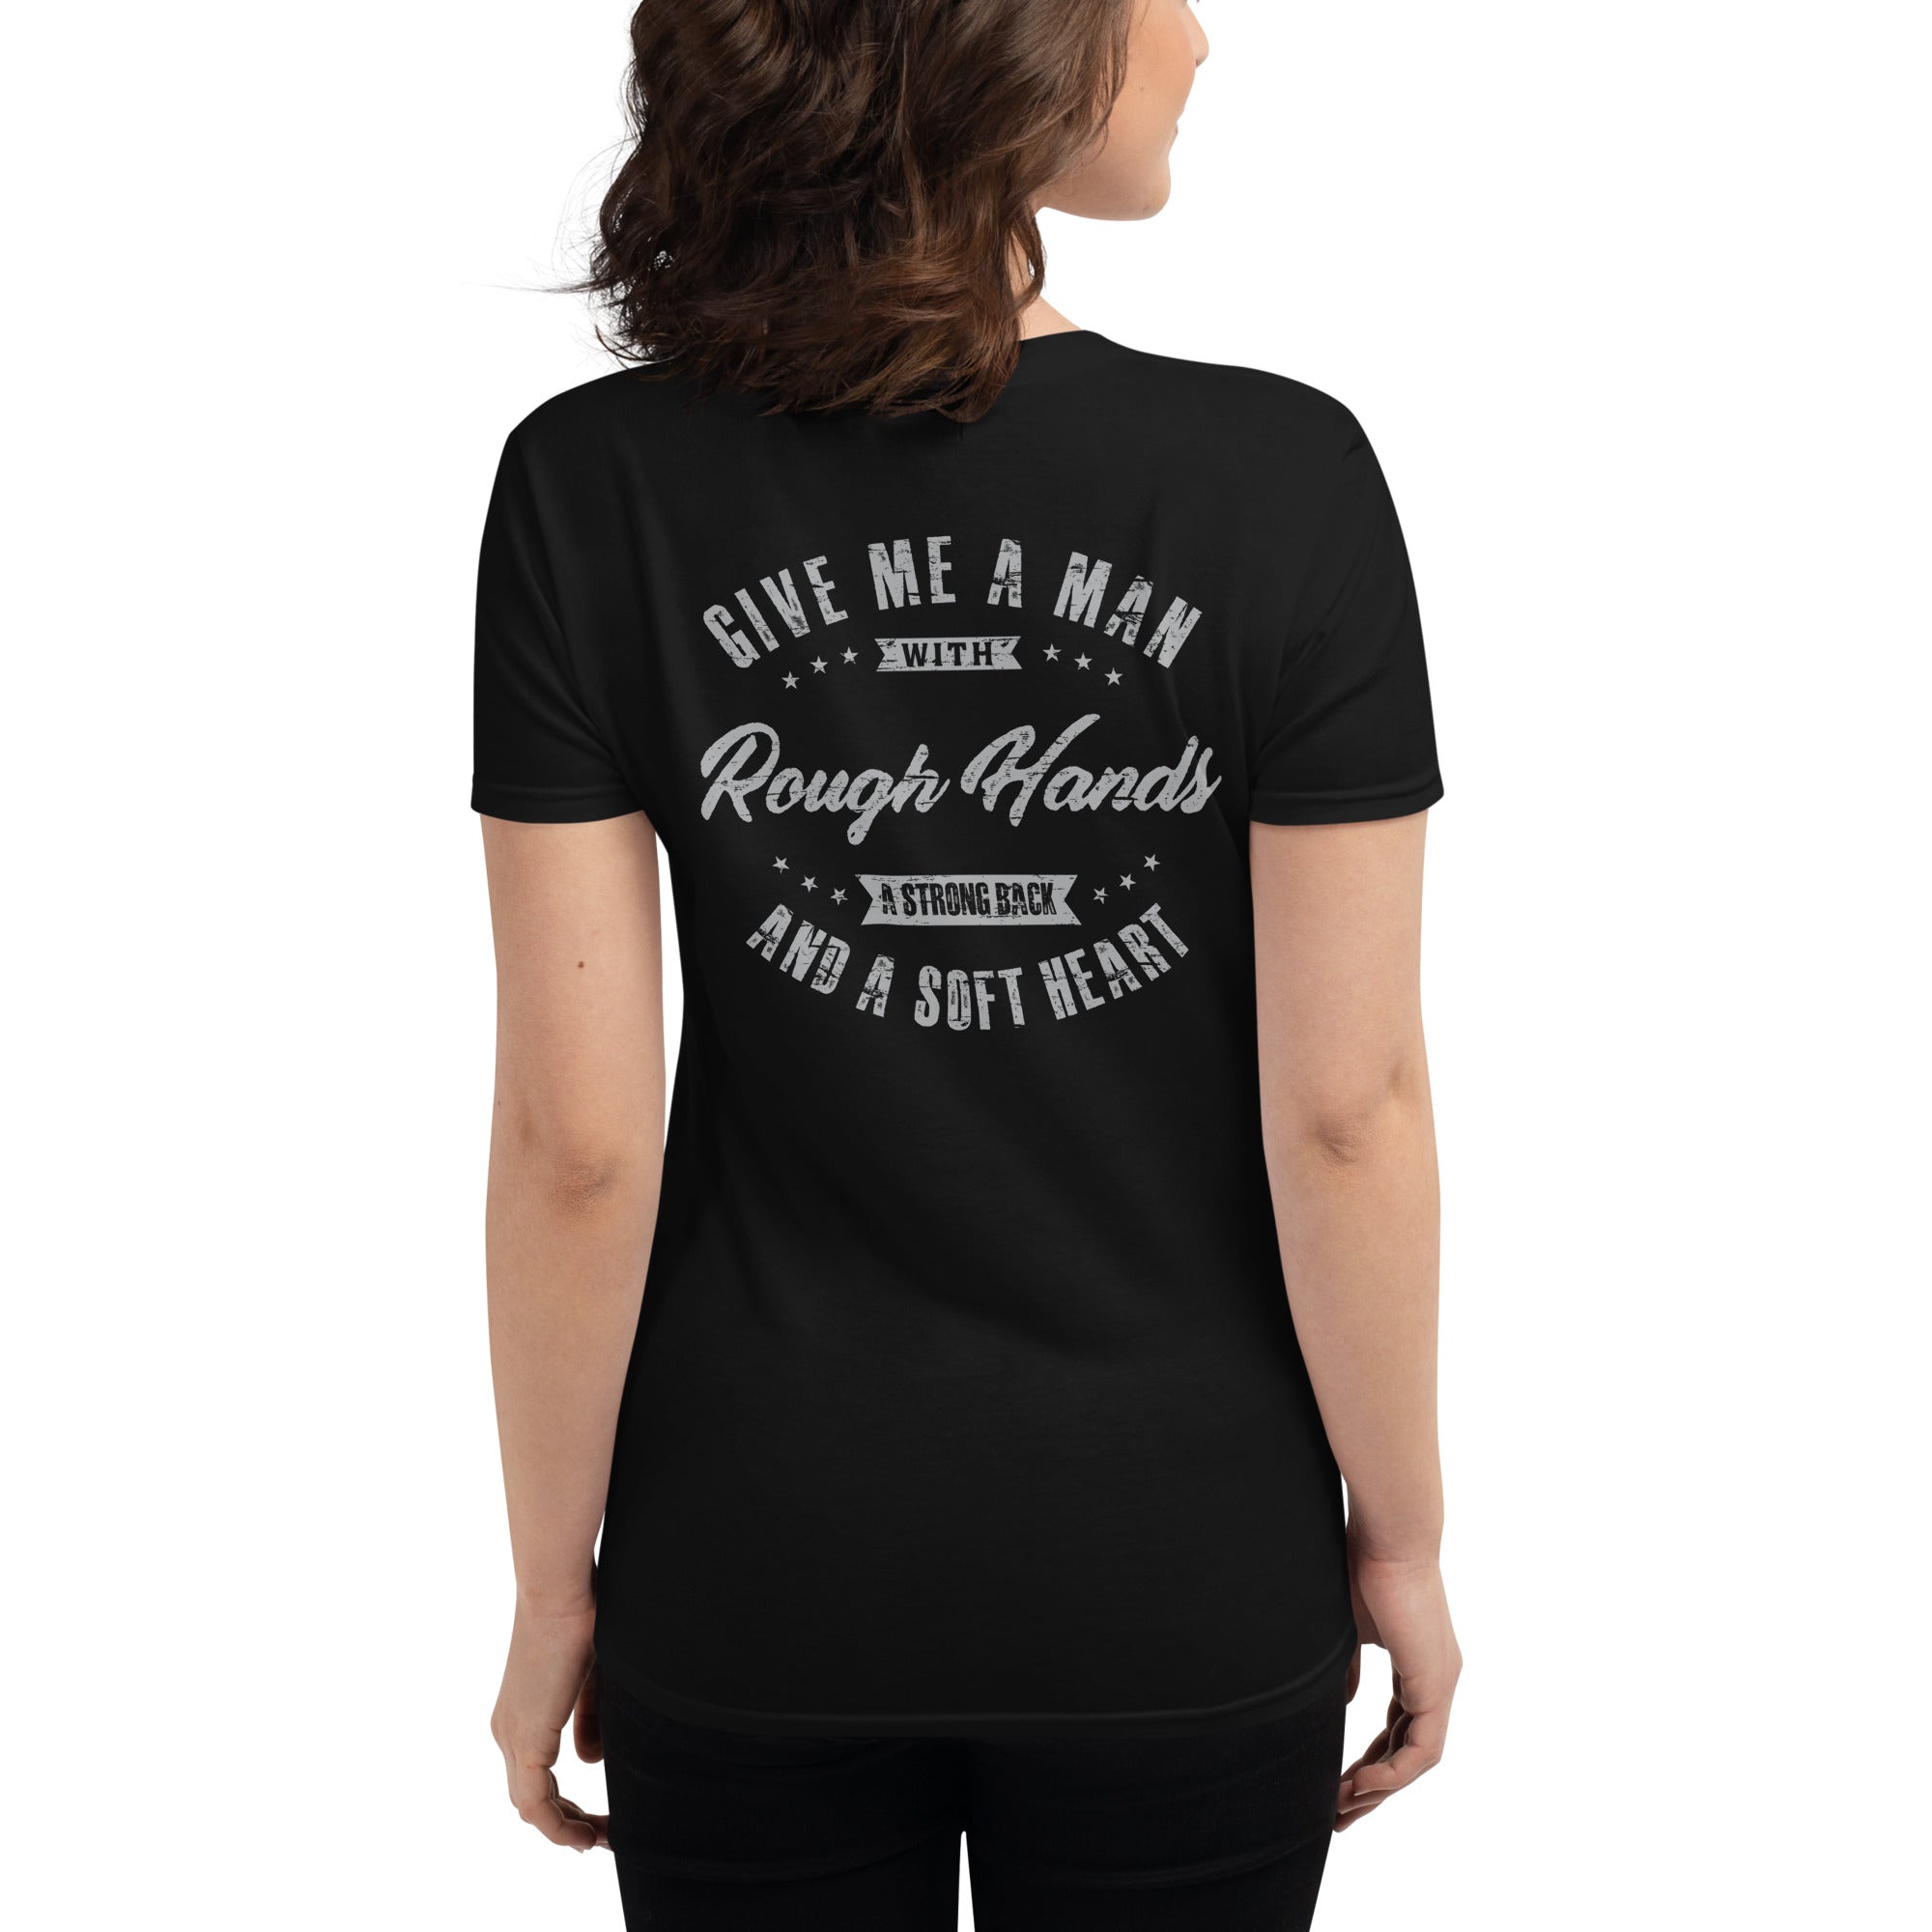 Give me a man with rough hands, a strong back and a soft heart  I  Women's short sleeve t-shirt